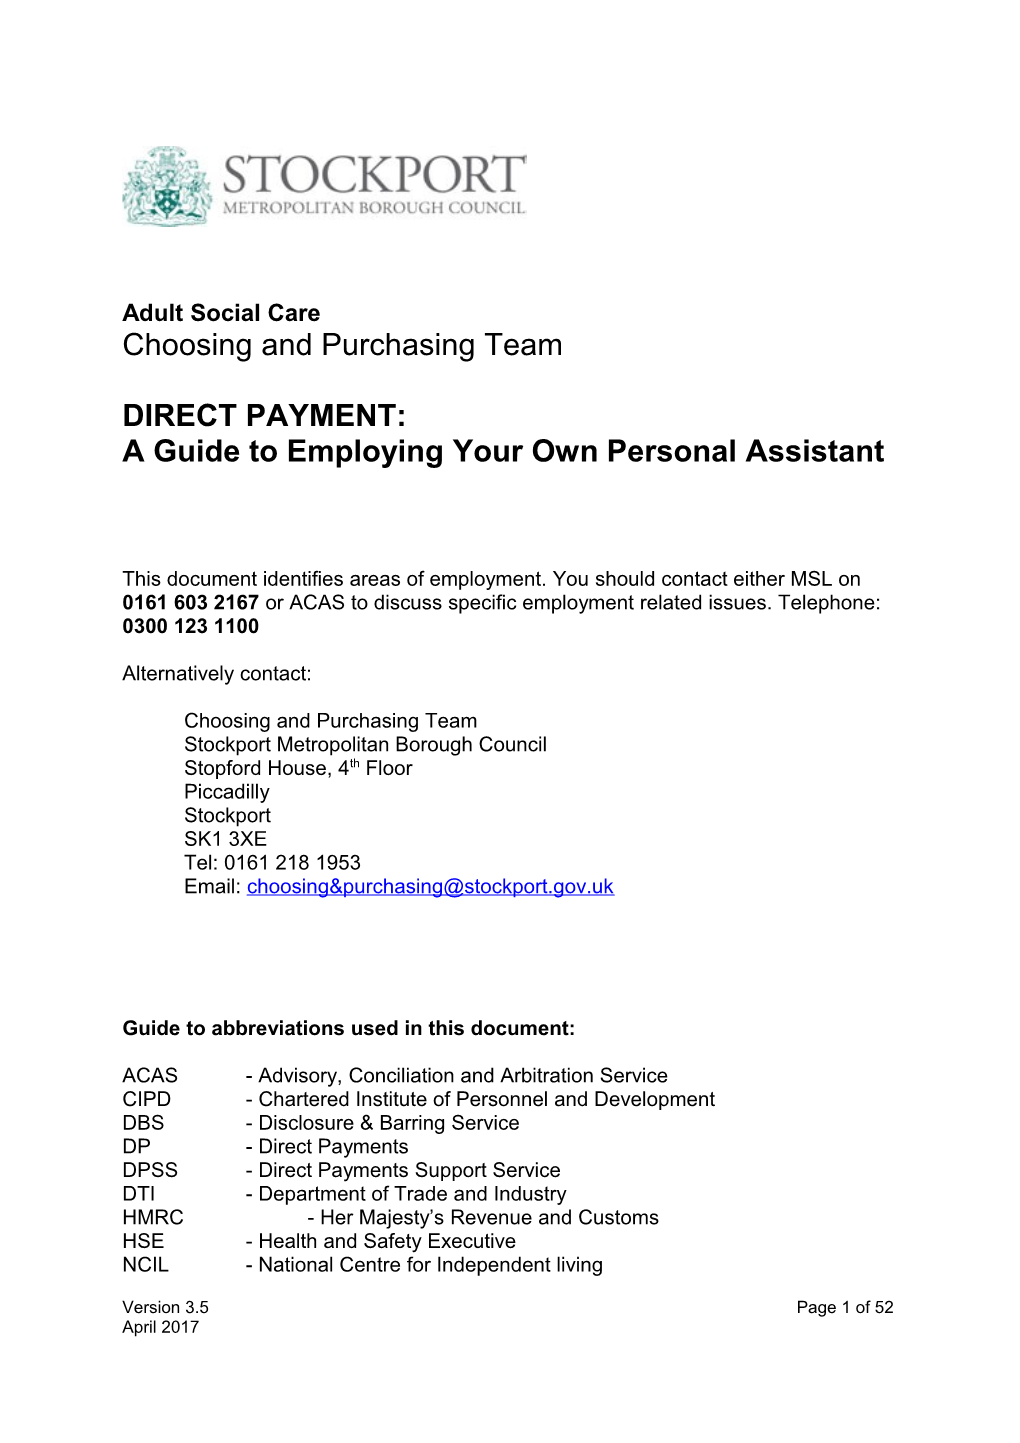 Stockport Direct Payment